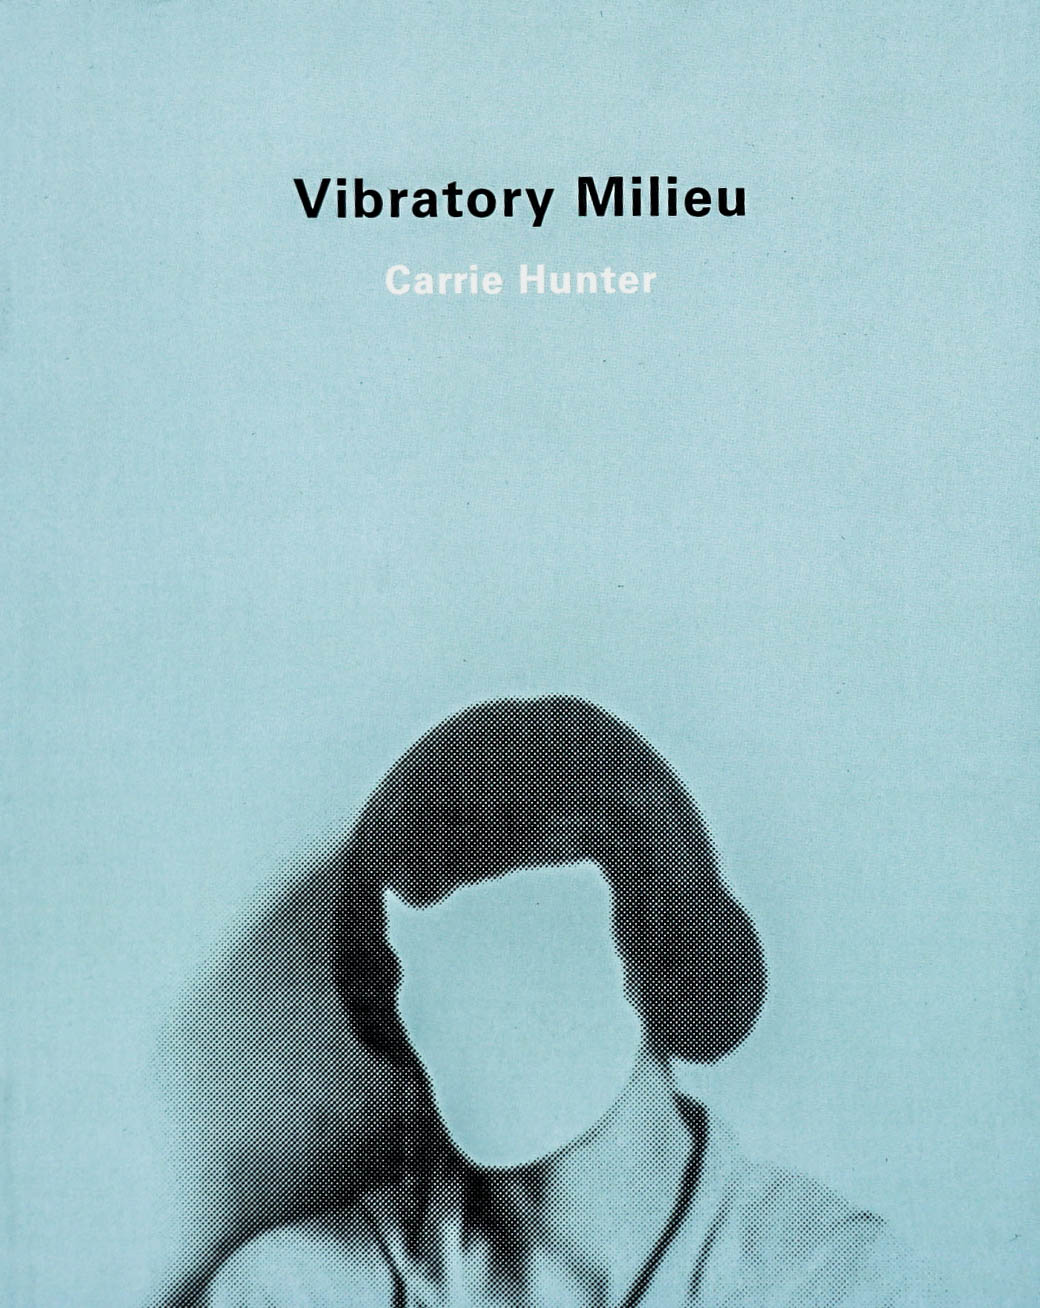 Light-blue book cover with a grainy, sort of comic-book-esque textured photo of a women, her face blank. At the top, Vibratory Milieu -Carrie Hunter is written.